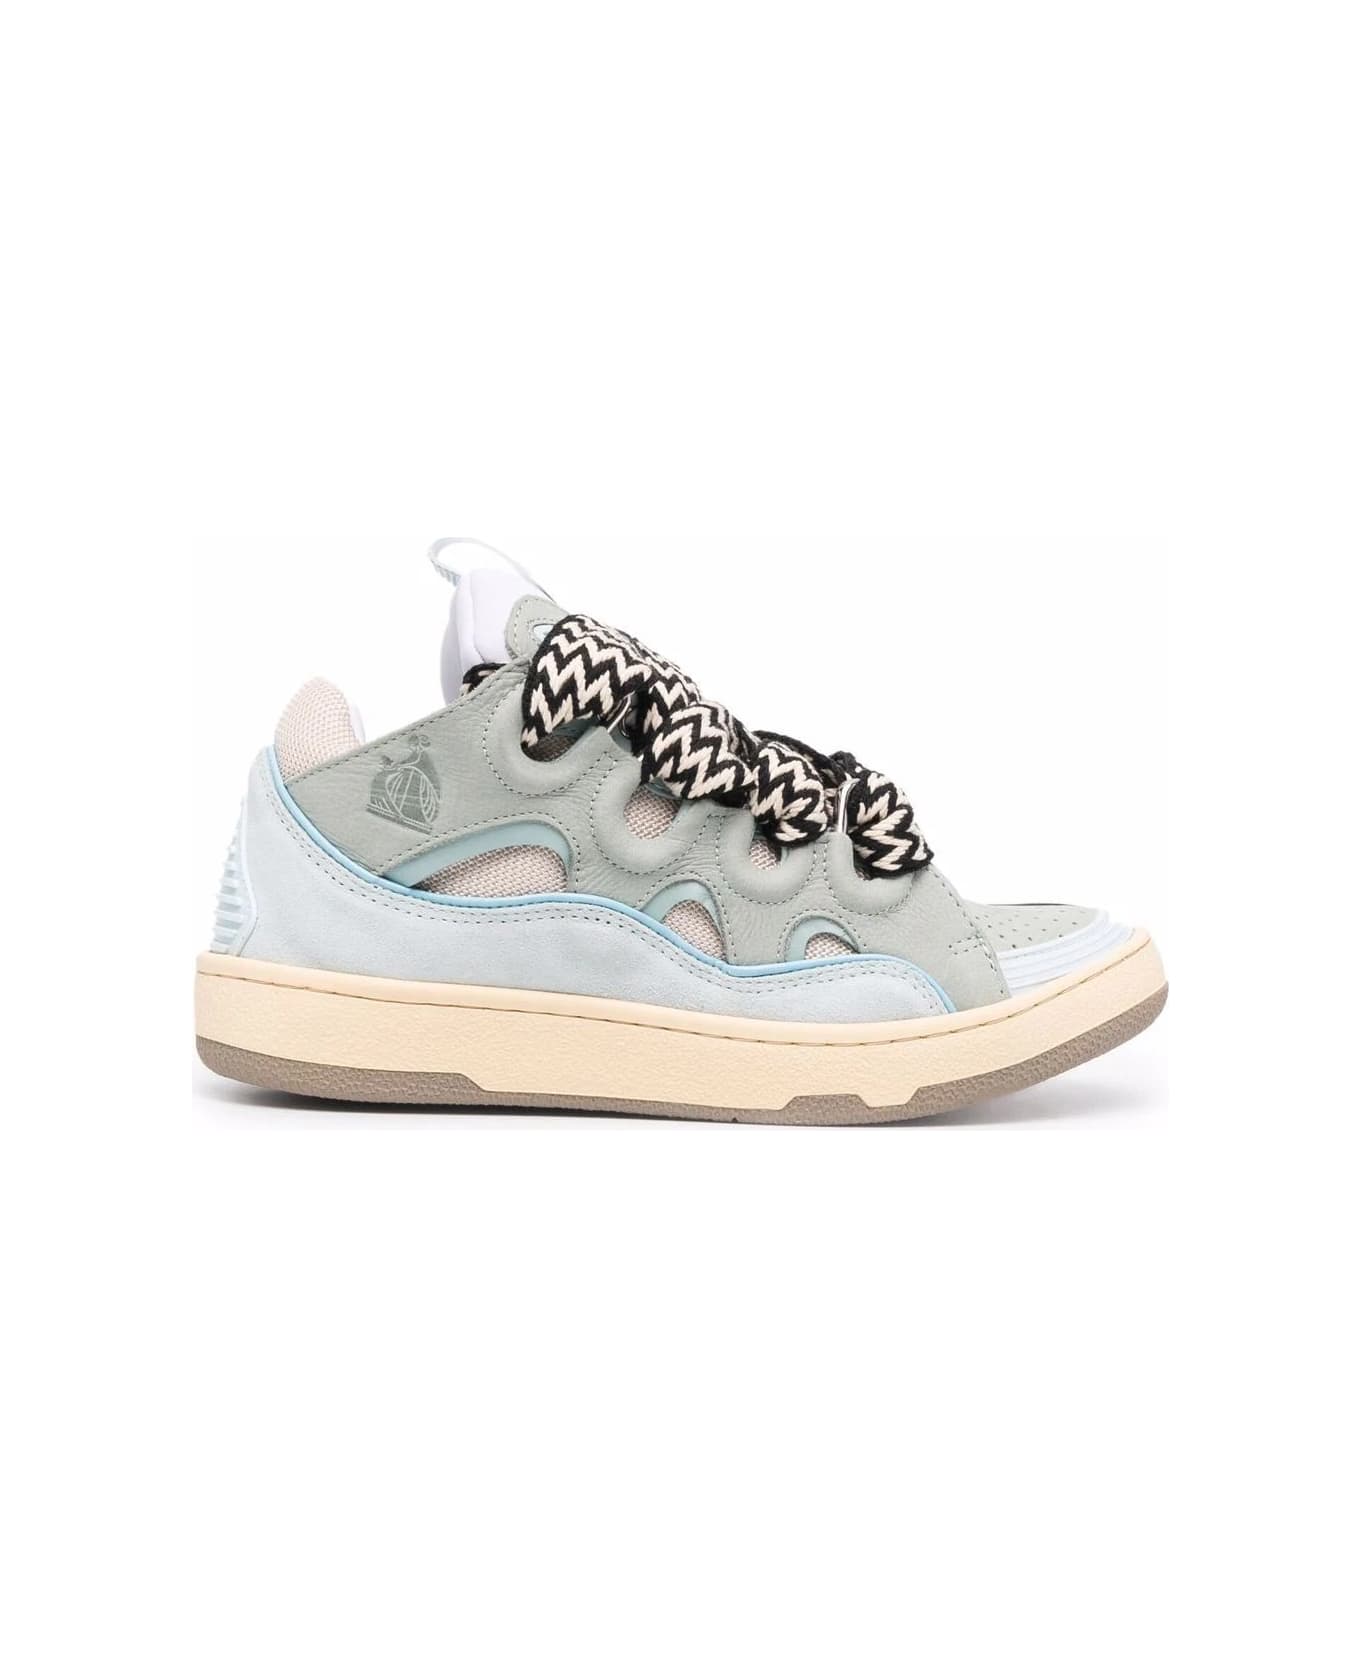 Lanvin Curb Sneakers In Light Blue Leather - Blue